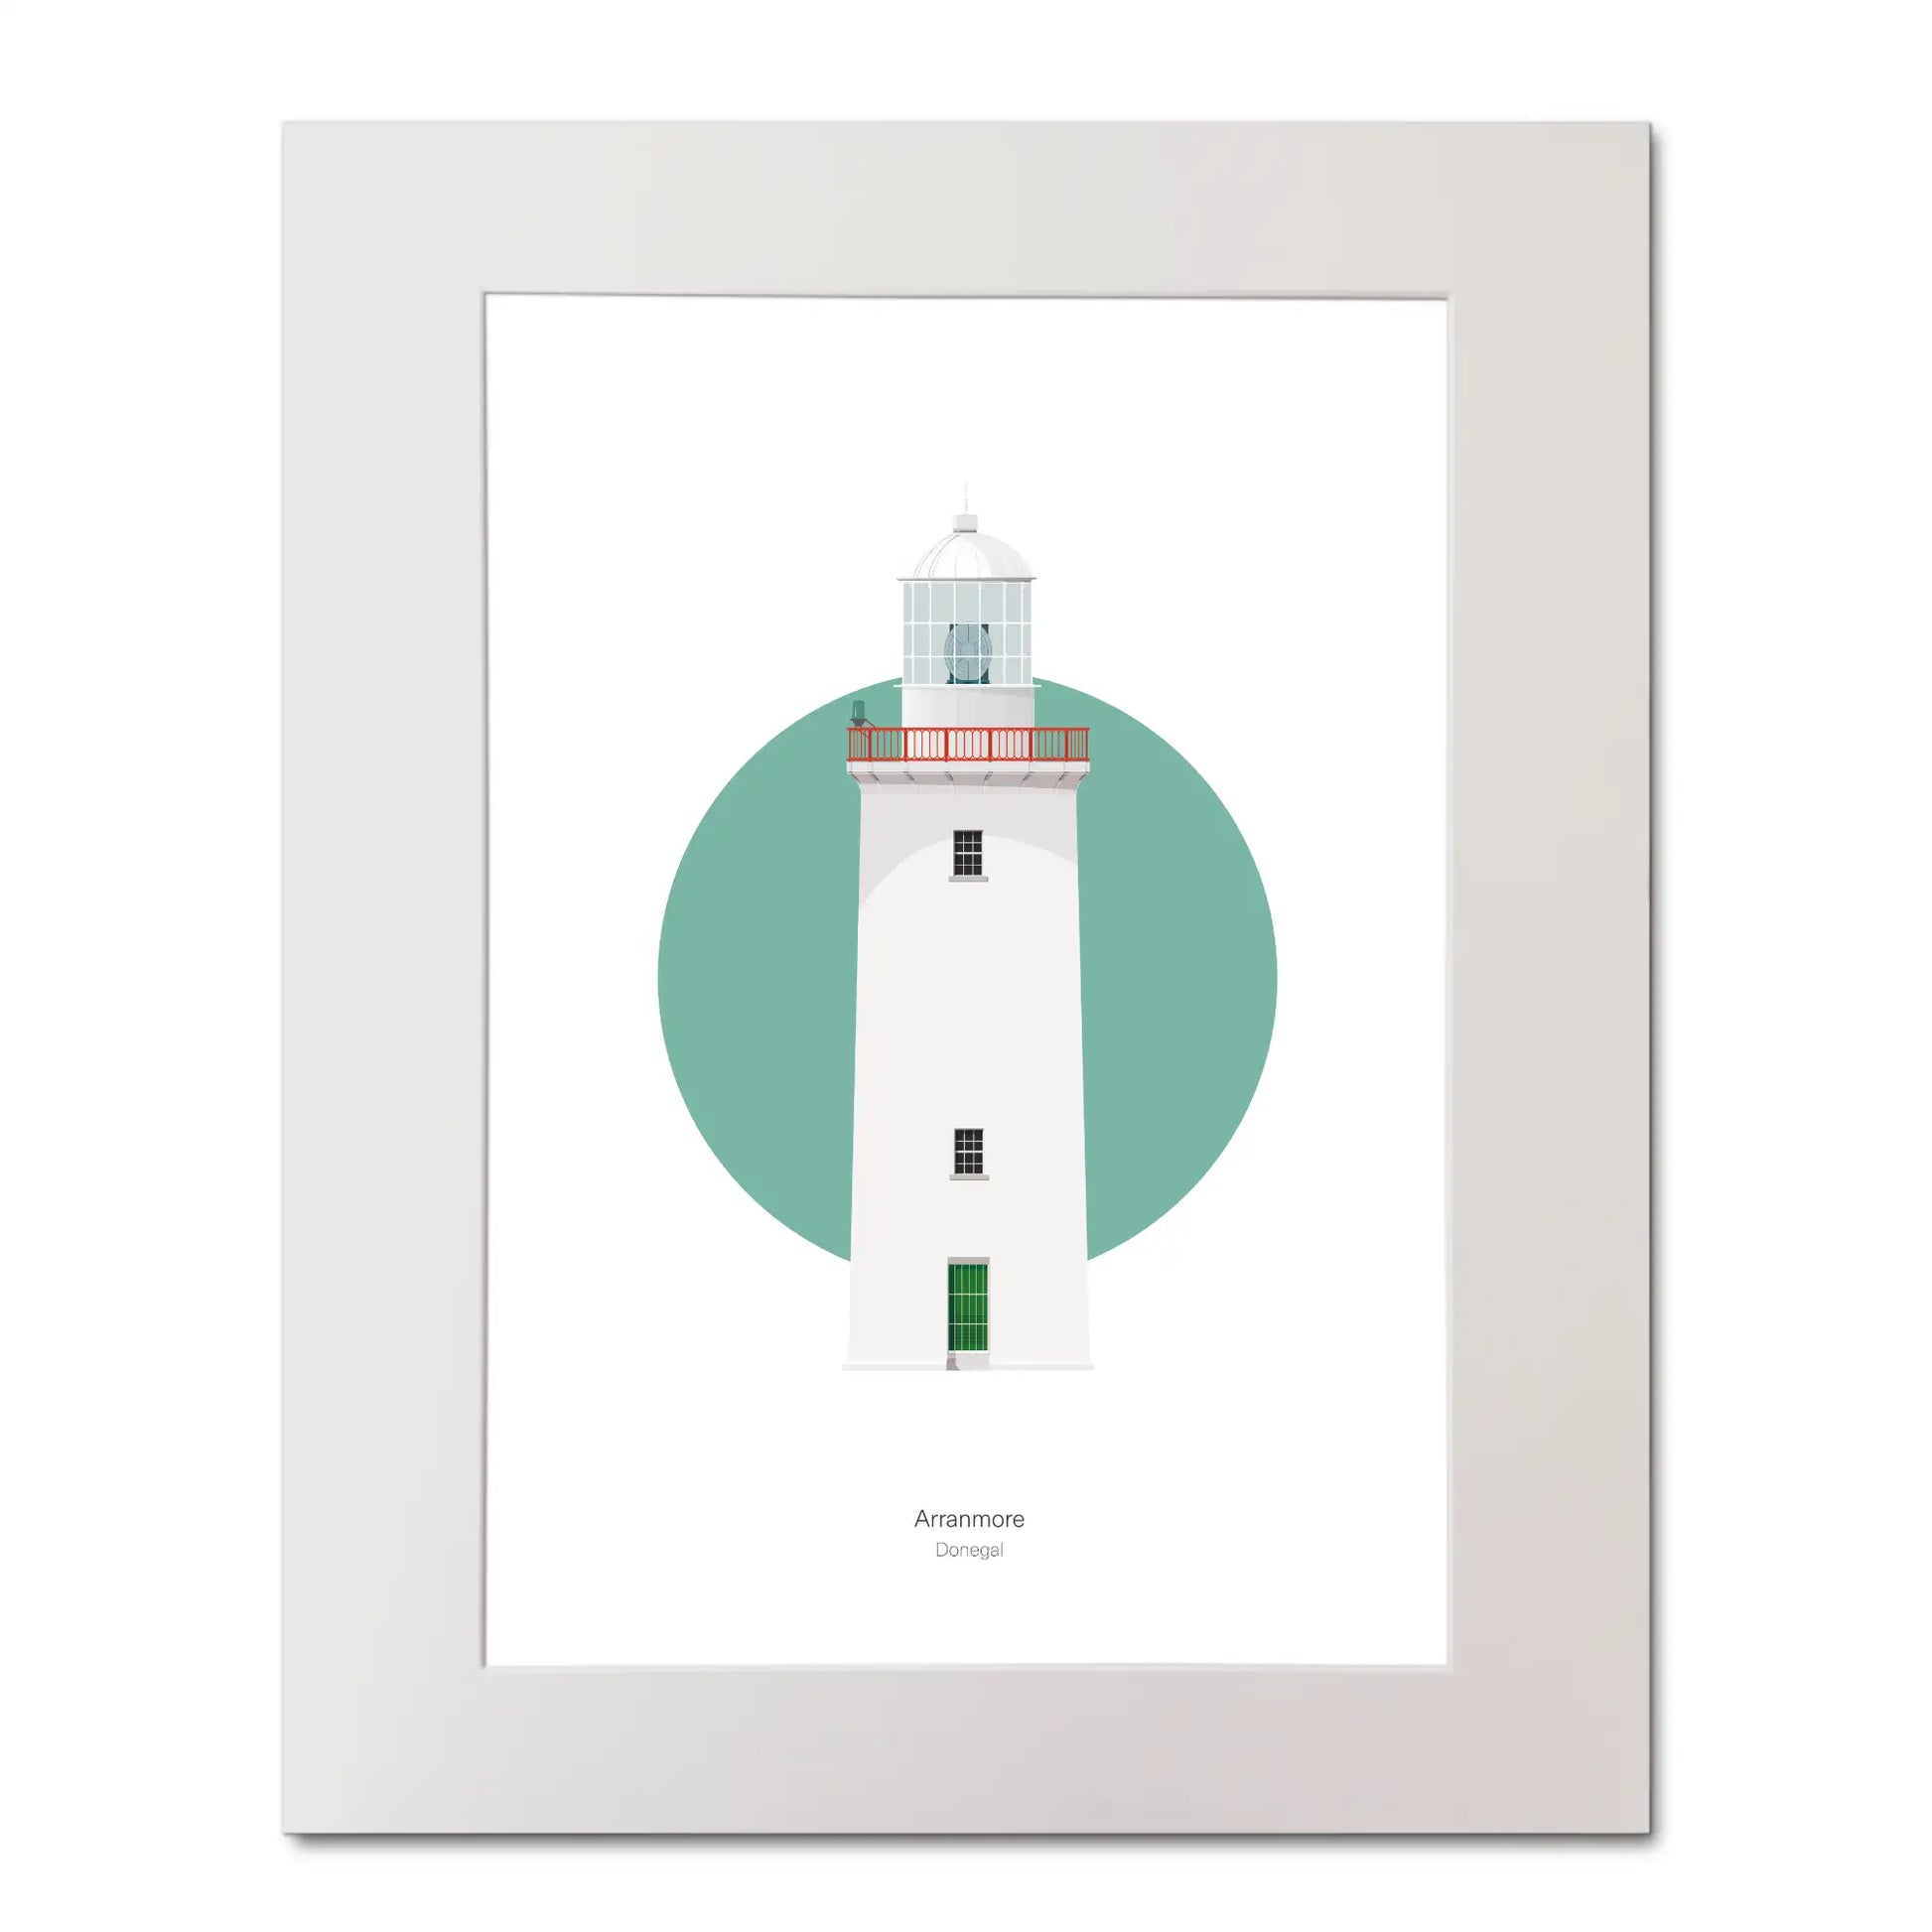 Illustration of Arranmore lighthouse on a white background inside light blue square, mounted and measuring 40x50cm.